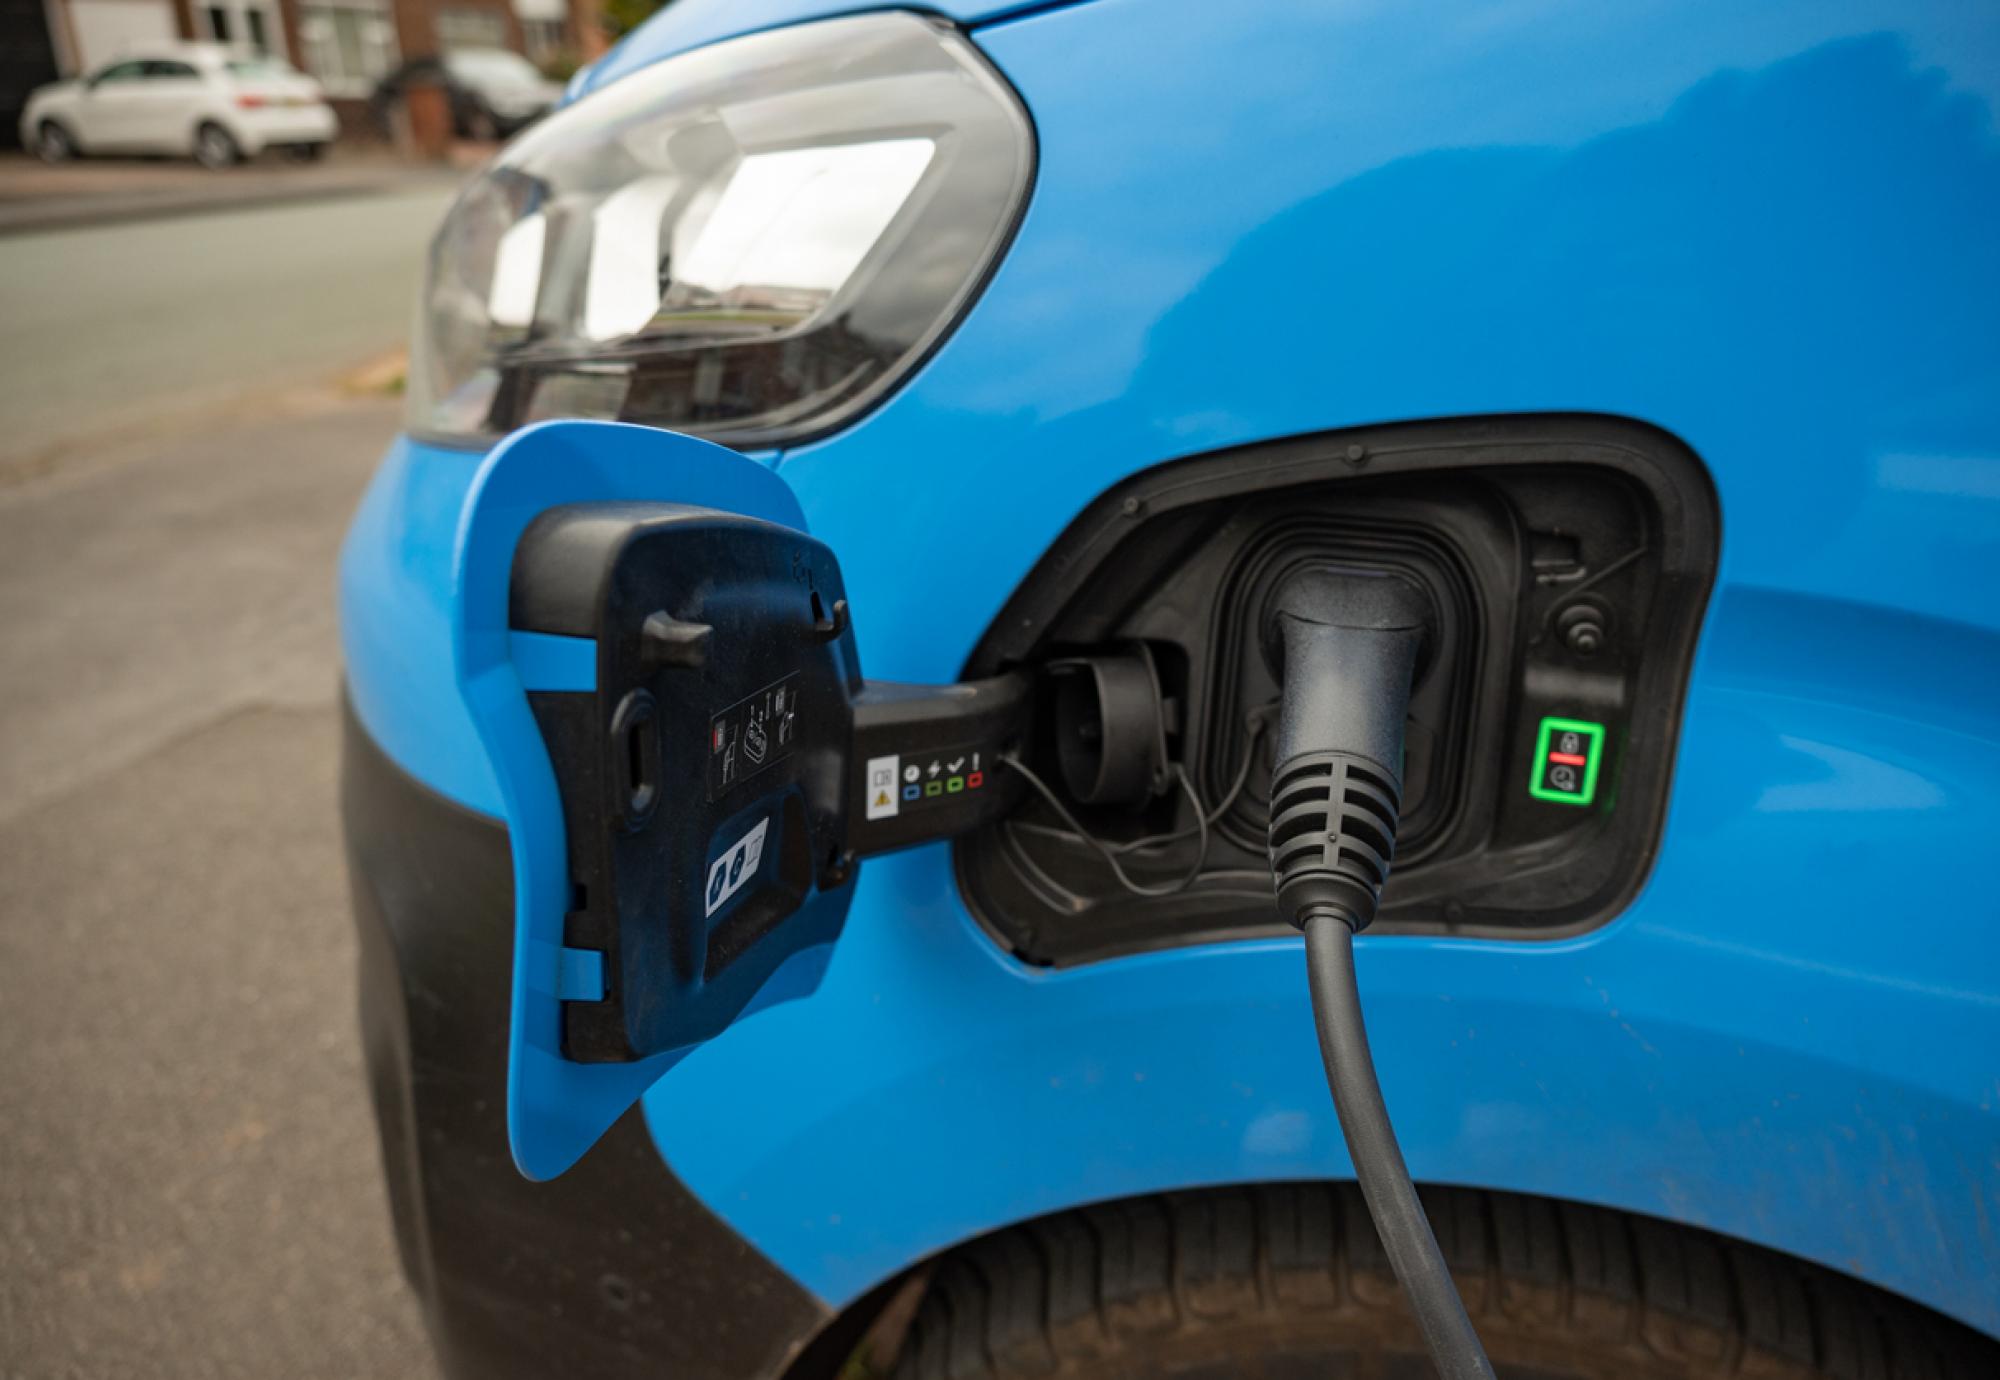 Electric Vehicle charging